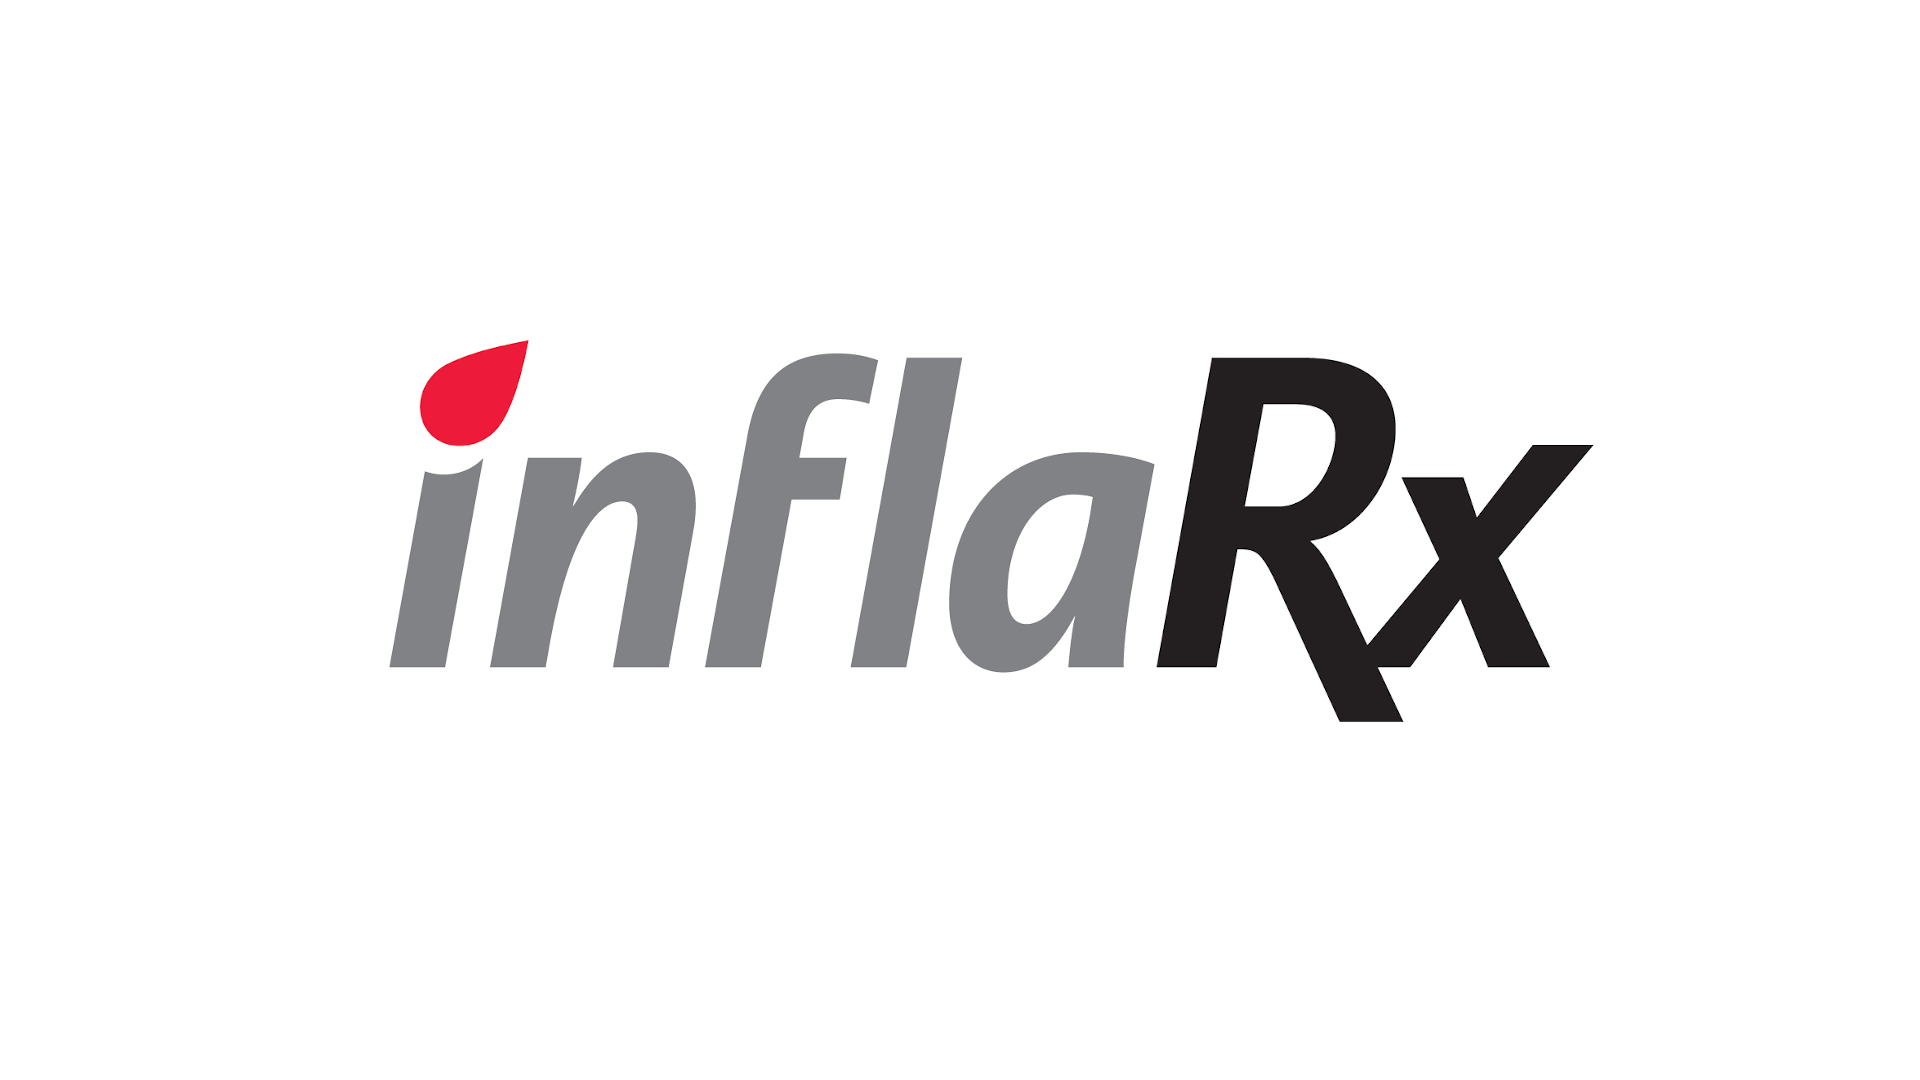 InflaRx Announces Commercial Launch of Gohibic (vilobelimab) in the U.S. for the Treatment of Critically Ill COVID-19 Patients